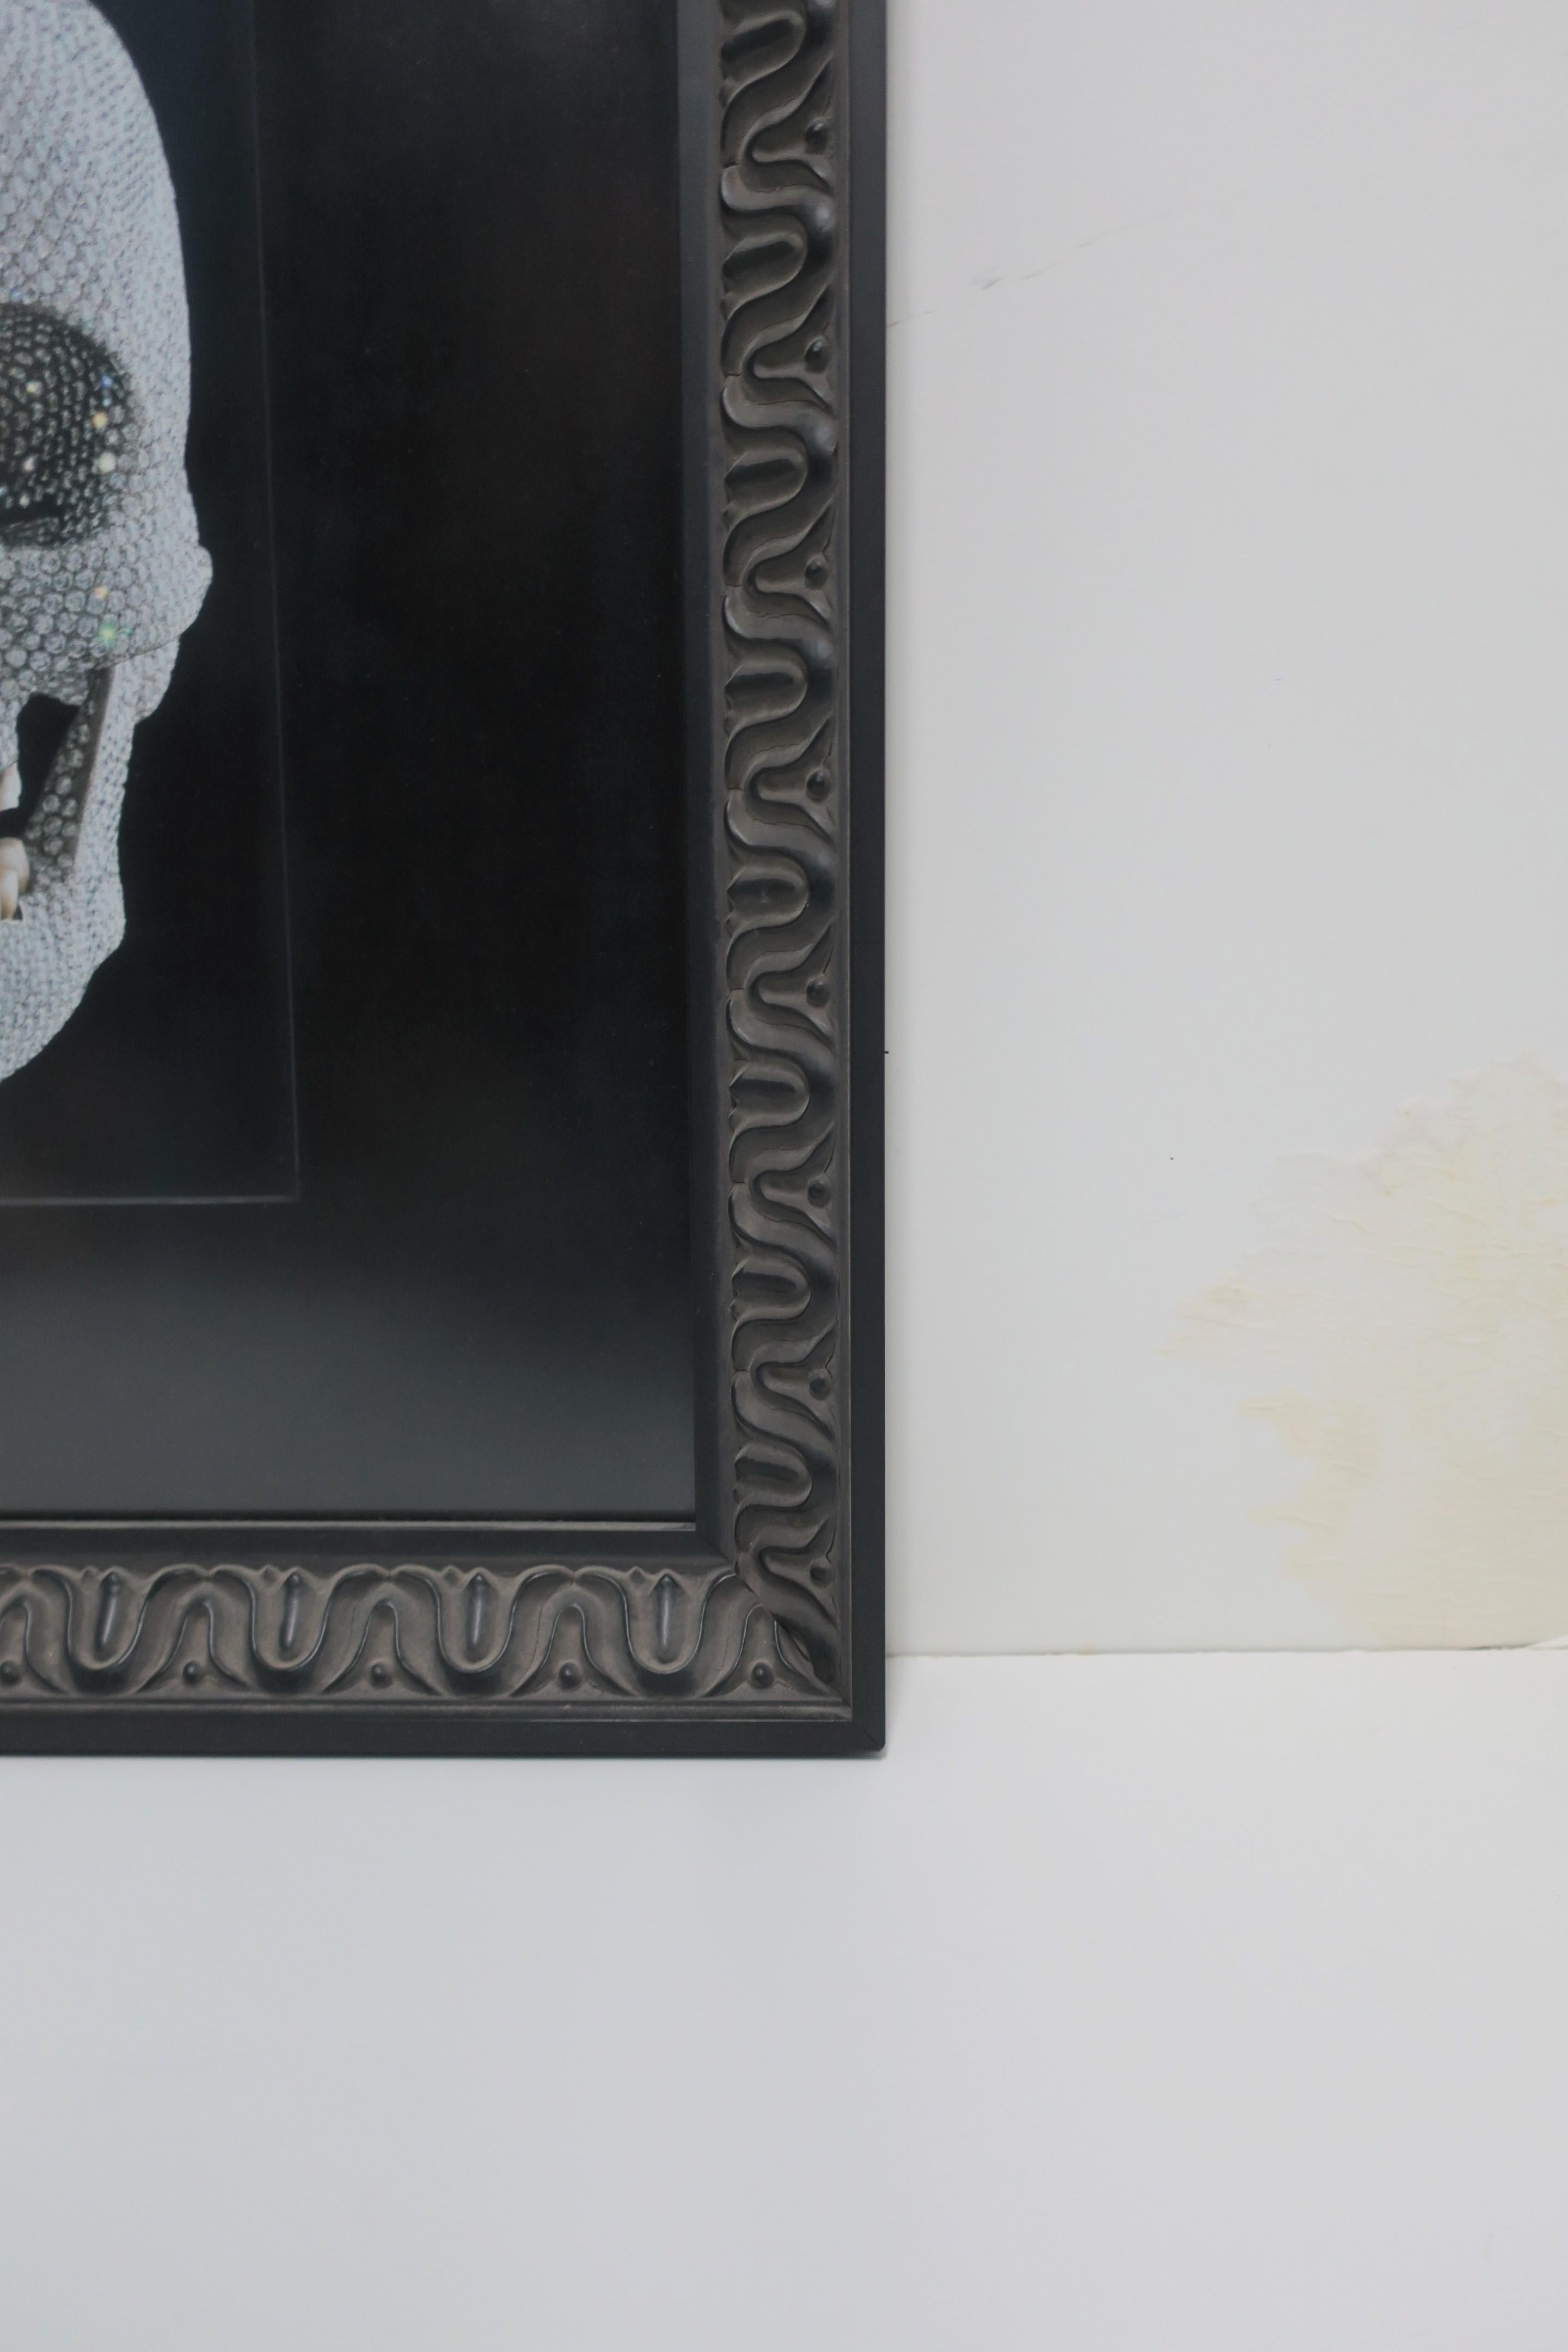 Post-Modern Diamond Skull, For The Love of God, by Damien Hirst, with Black Picture Frame